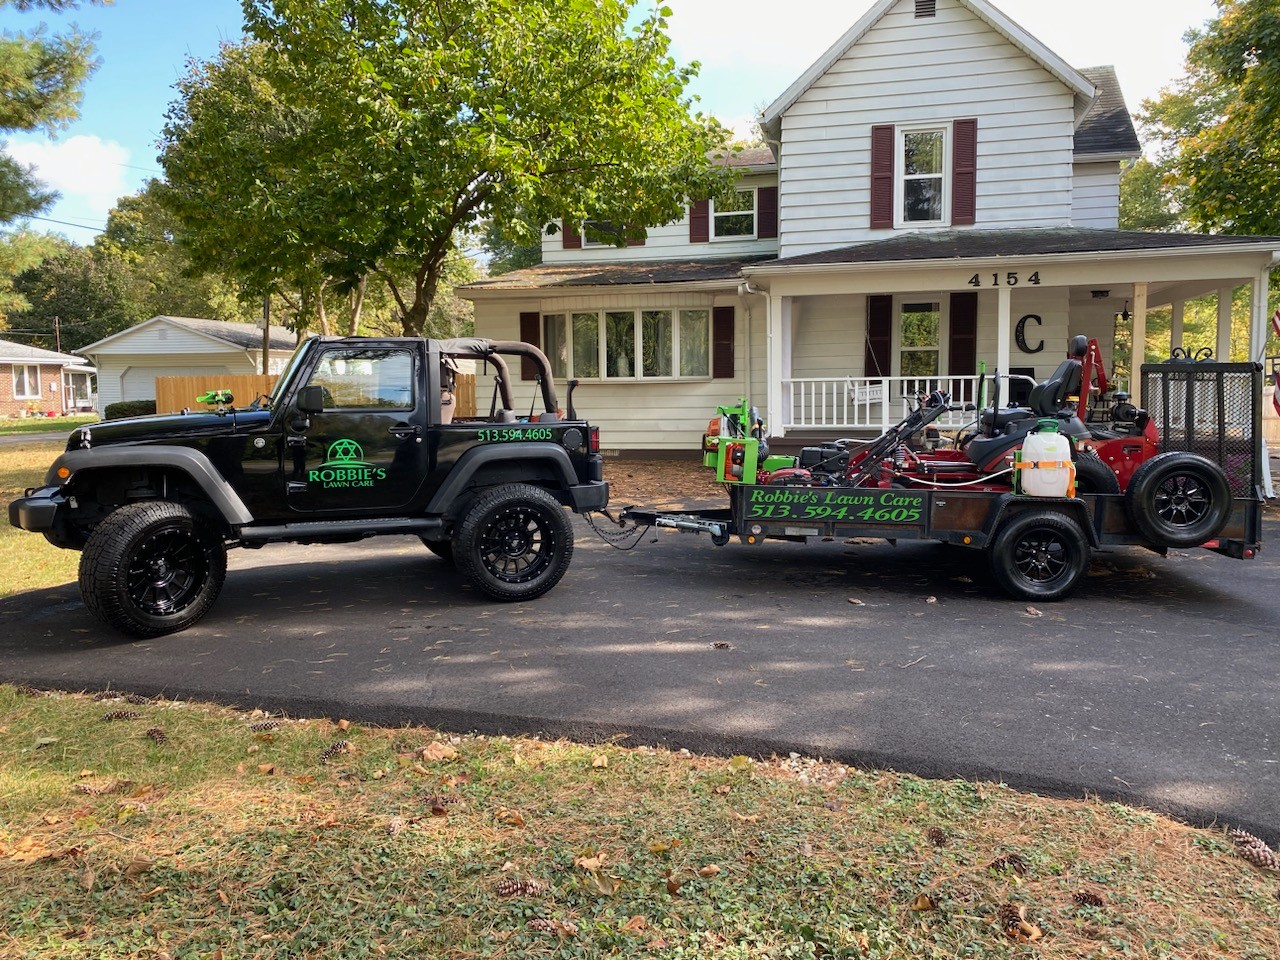 Robbie's Lawn Care, LLC team in Middletown, OH - people or person